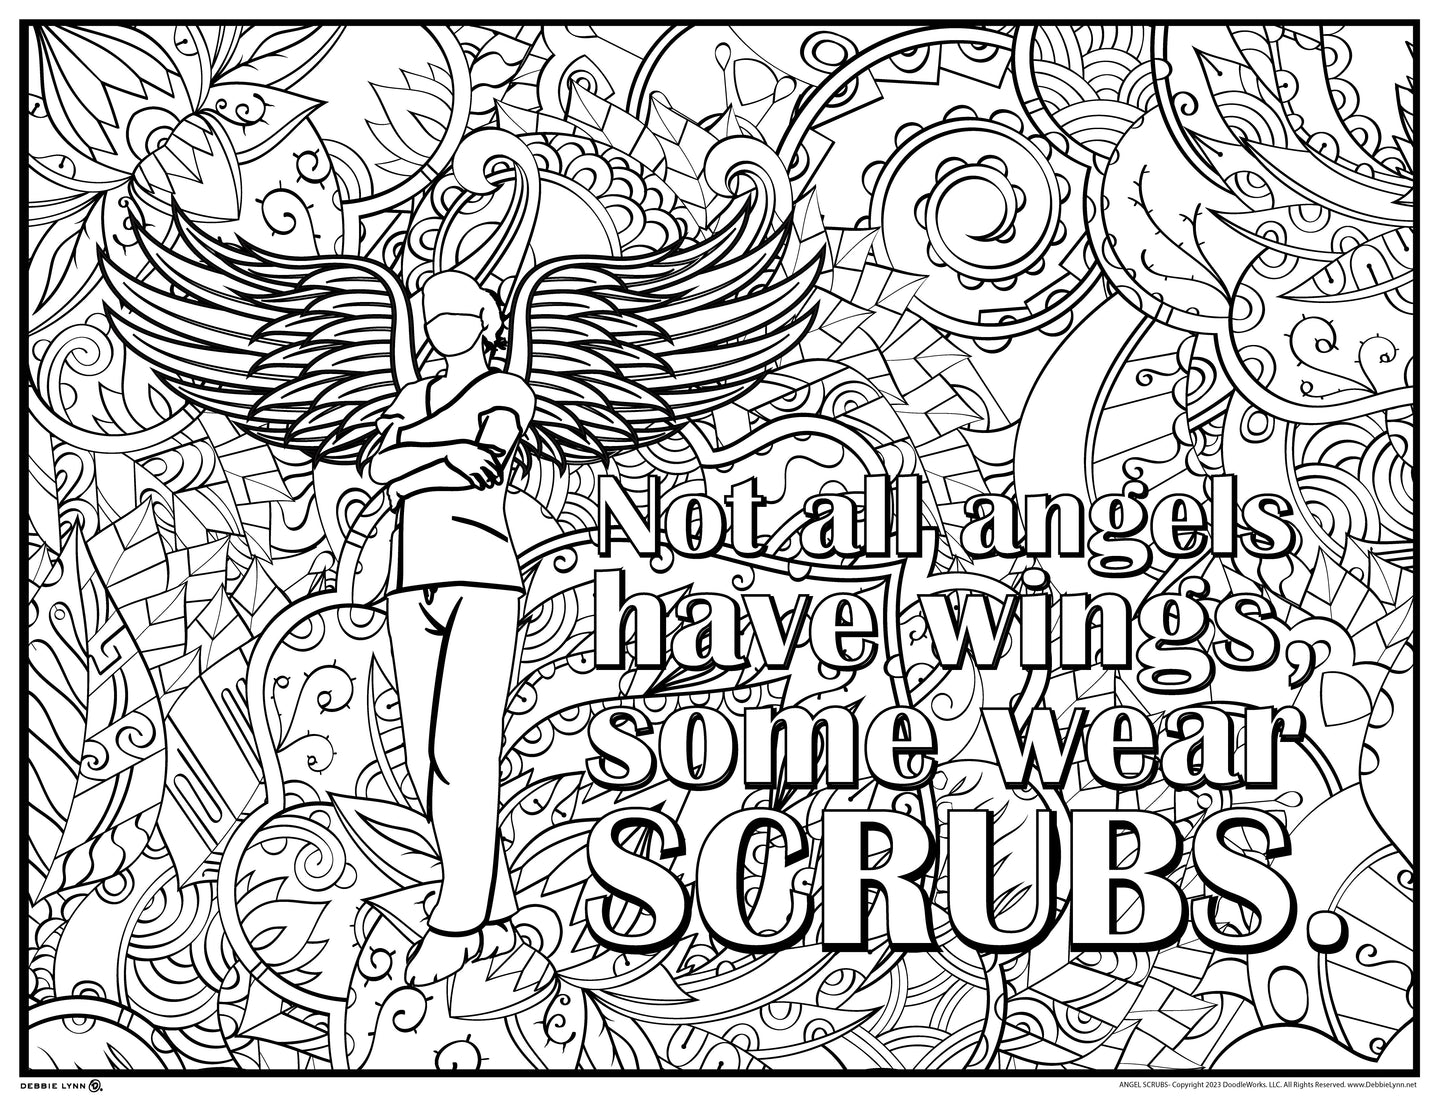 Angels in Scrubs Personalized Giant Coloring Poster 46" x 60"